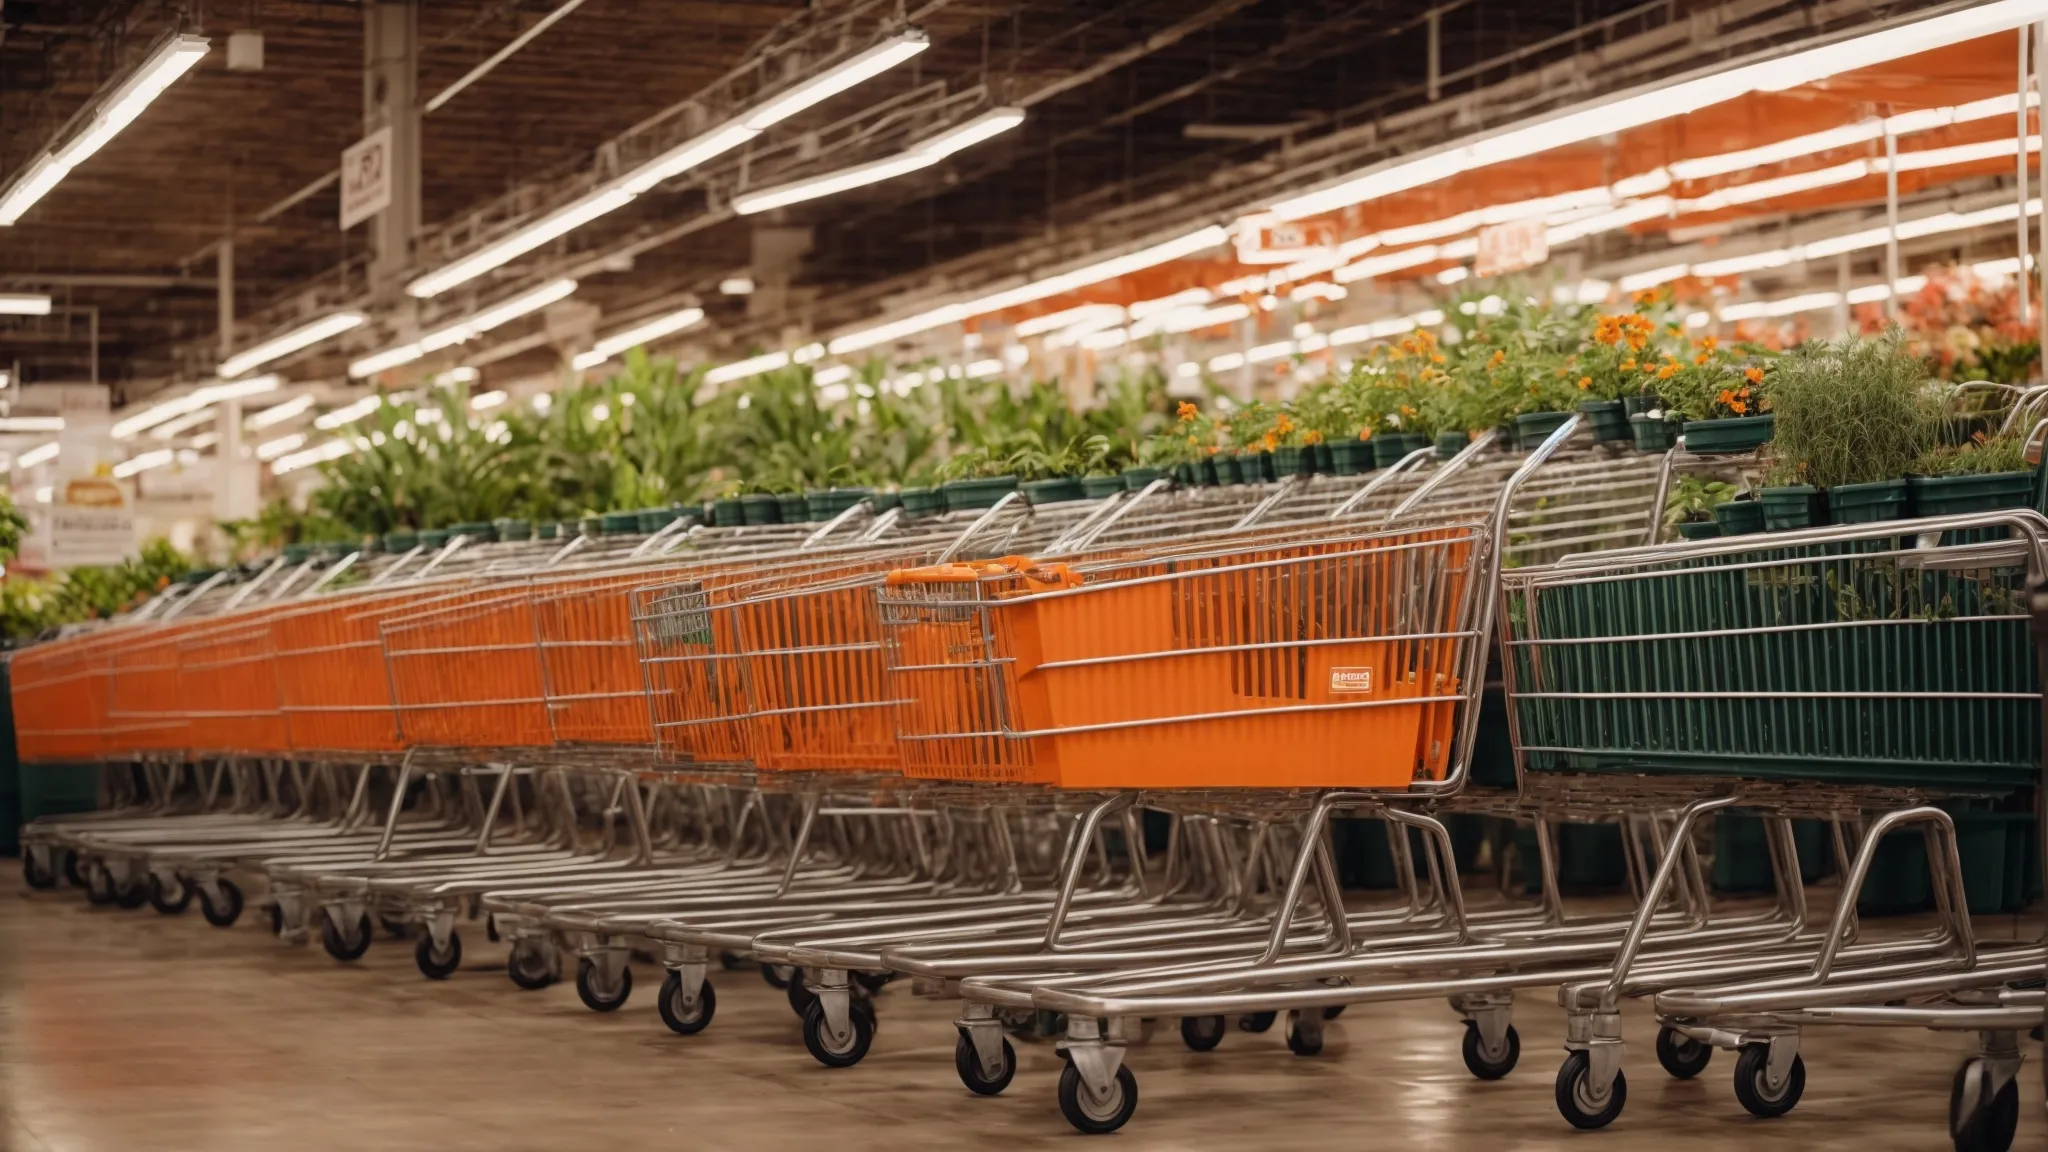 a row of orange home depot shopping carts lined up in front of the gardening section filled with plants and soils, under the bright fluorescent store lighting.